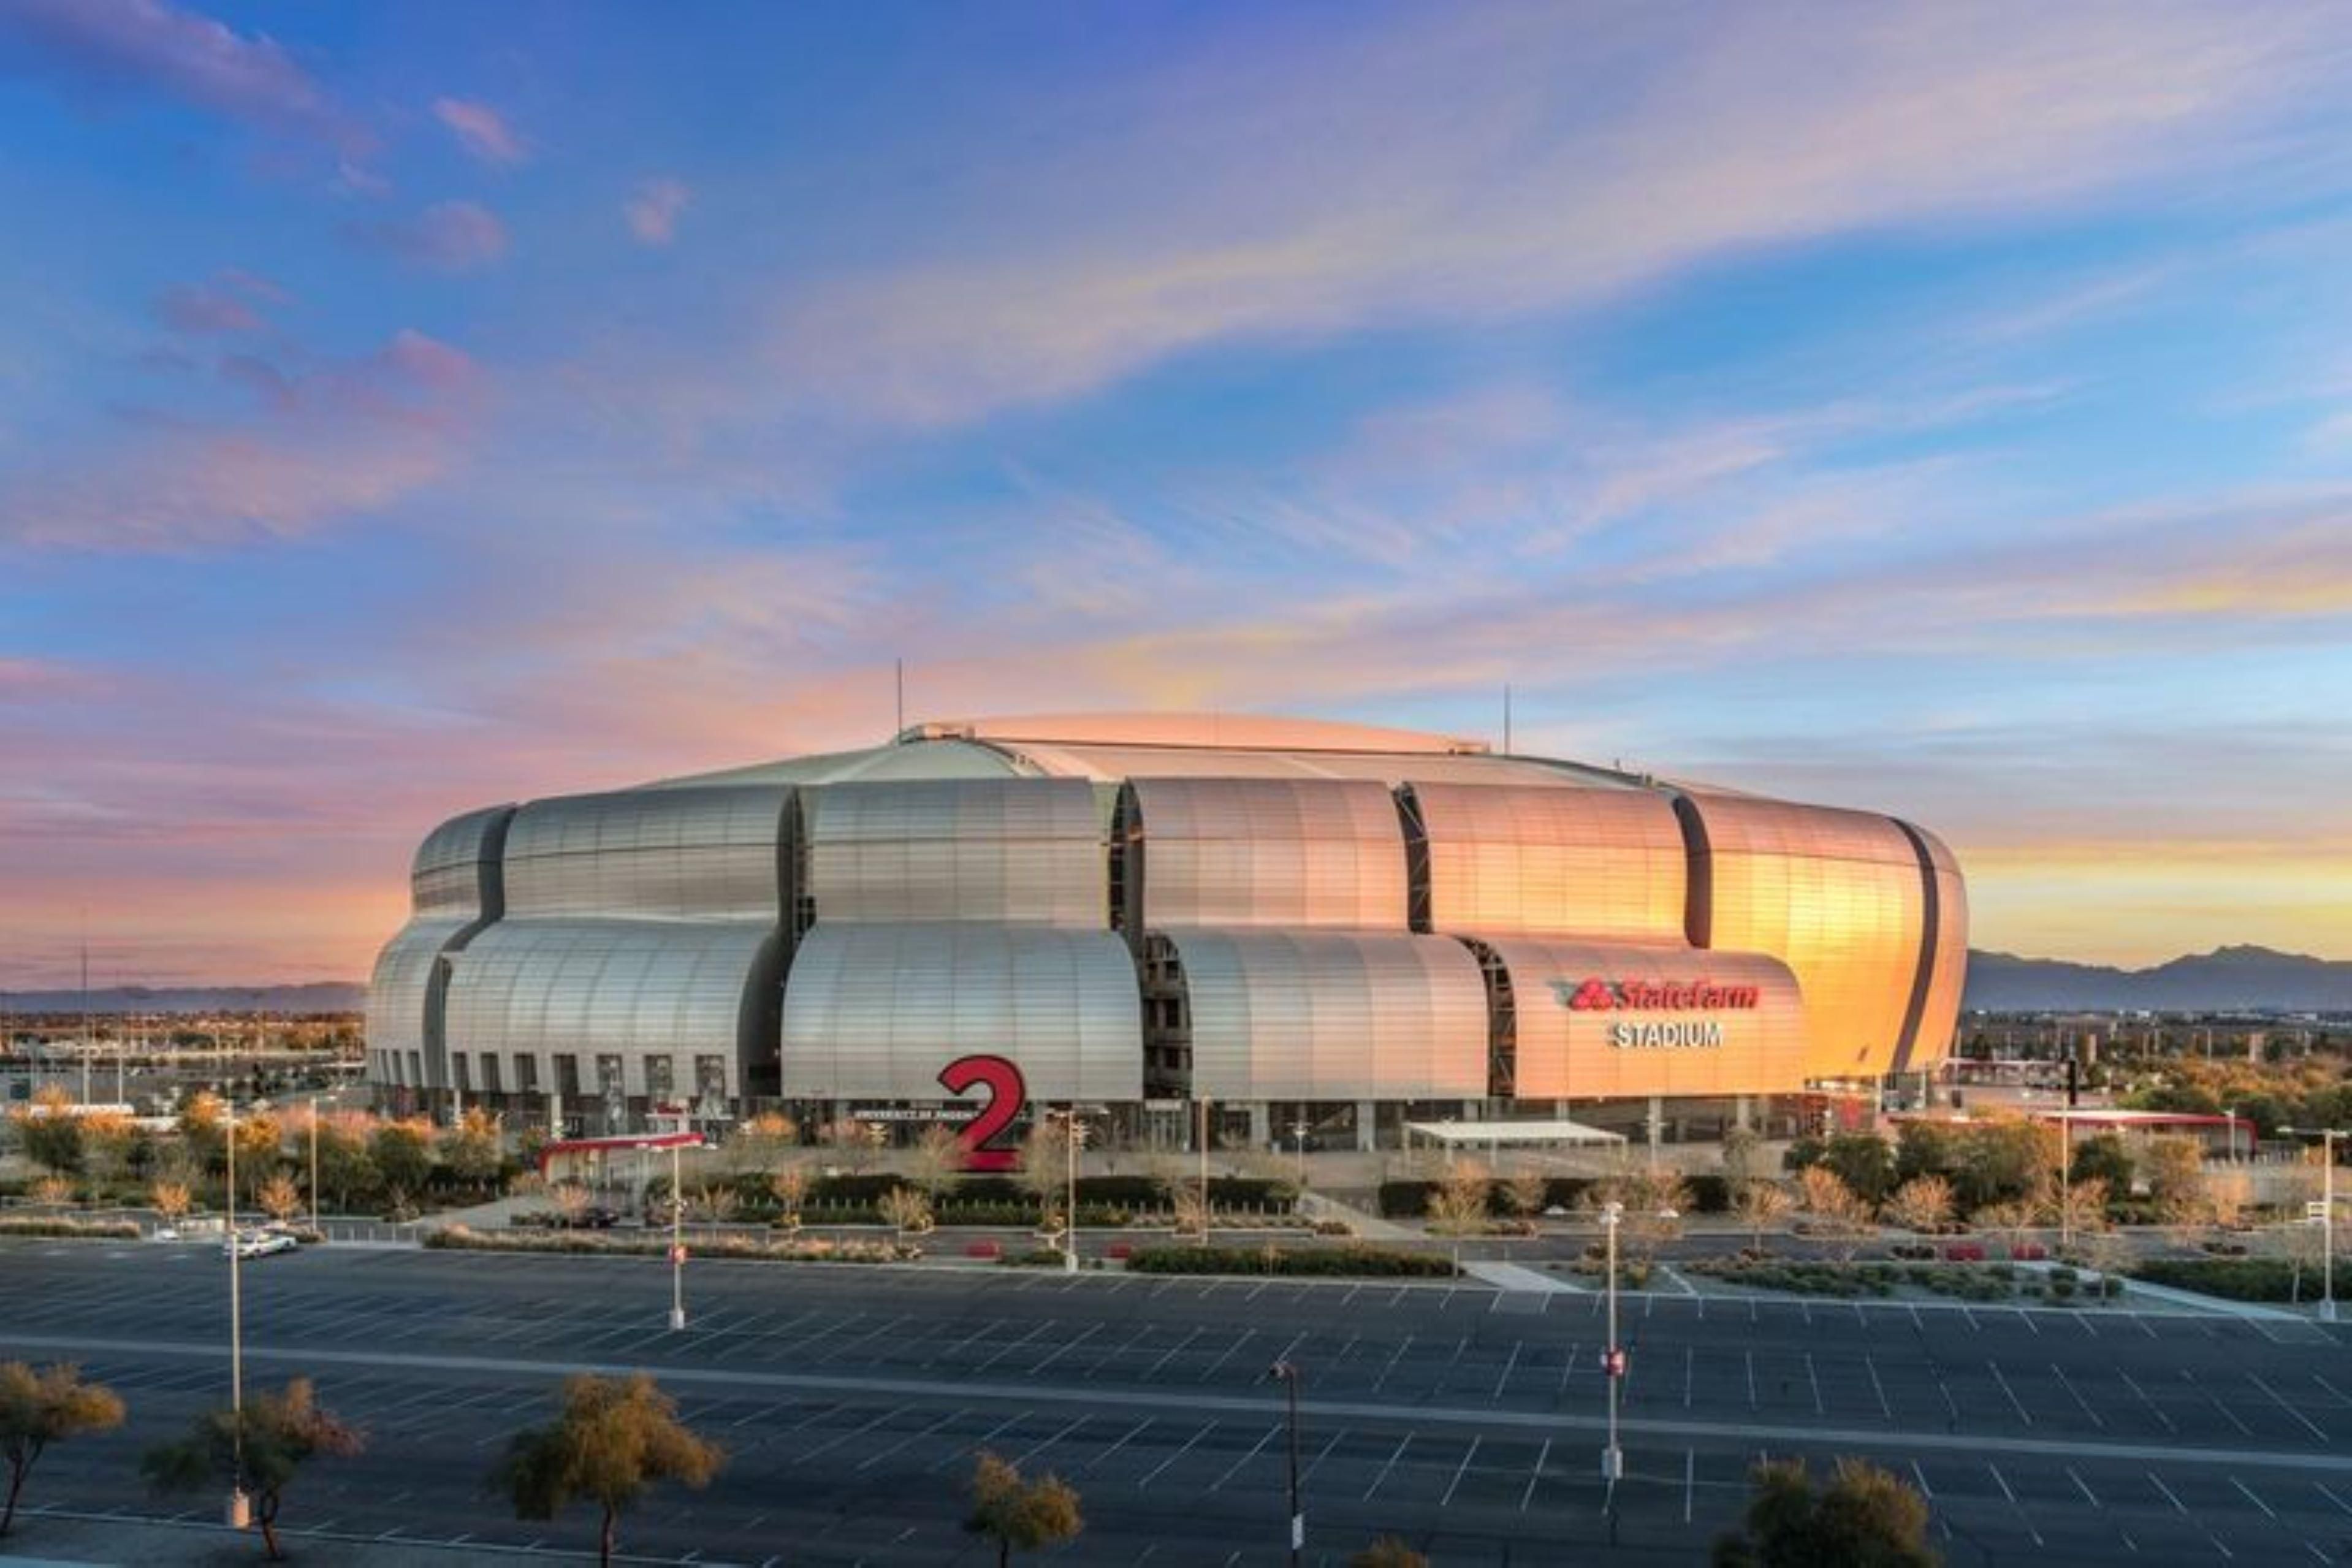 Our hotel is within one mile from State Farm Stadium, home of the Arizona Cardinals football team. State Farm Stadium hosts several events throughout the year which can include national events like NCAA Final Four, Super Bowl, concerts and local events as well. 